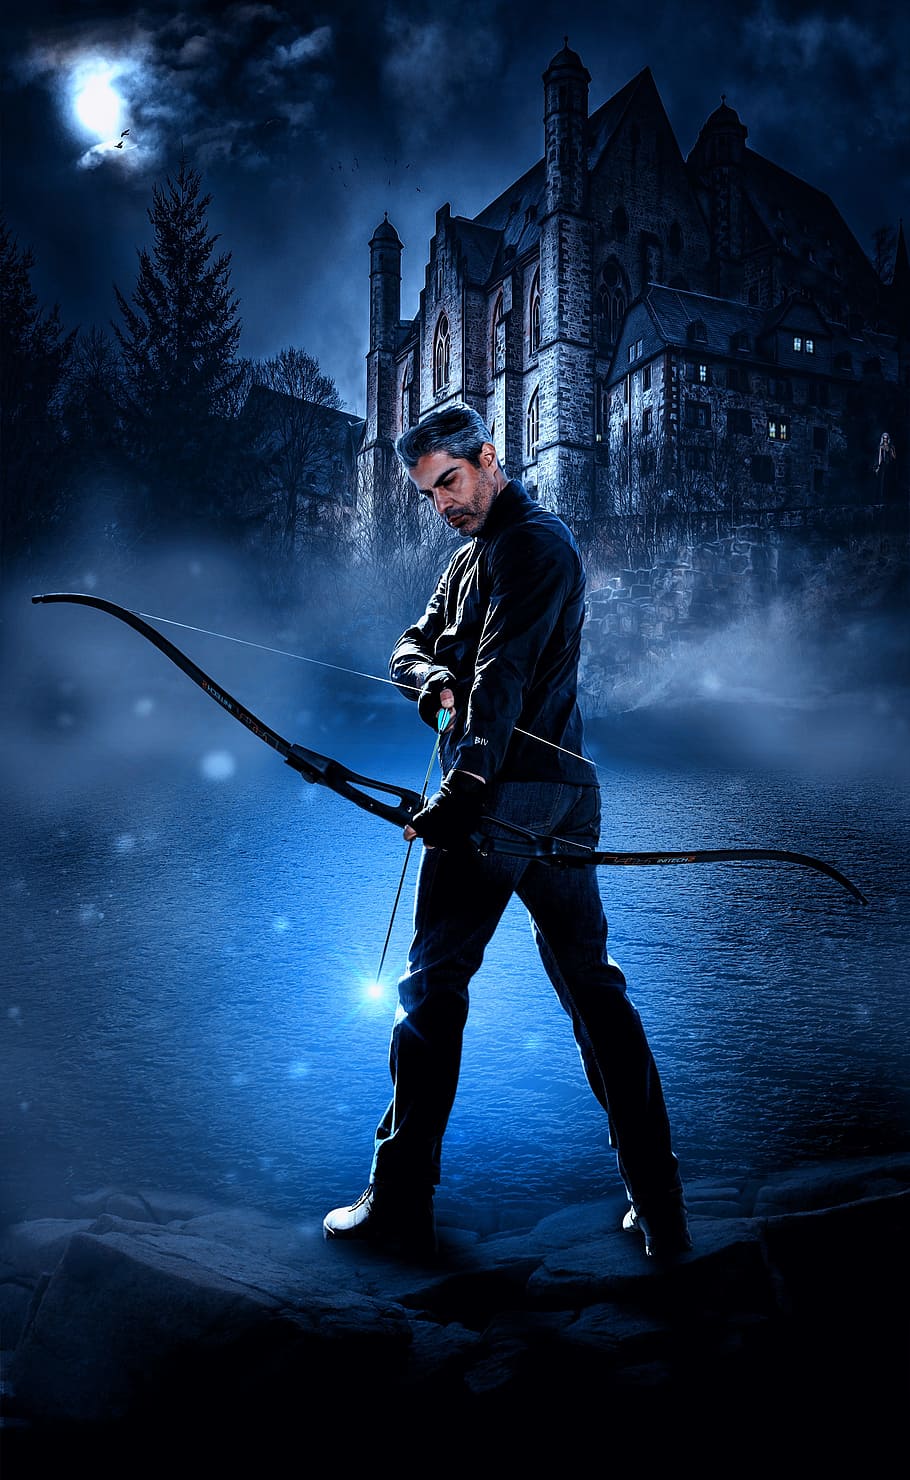 person, holding, composite, bow, composite bow, arrow, man, hunt, moon, weapon